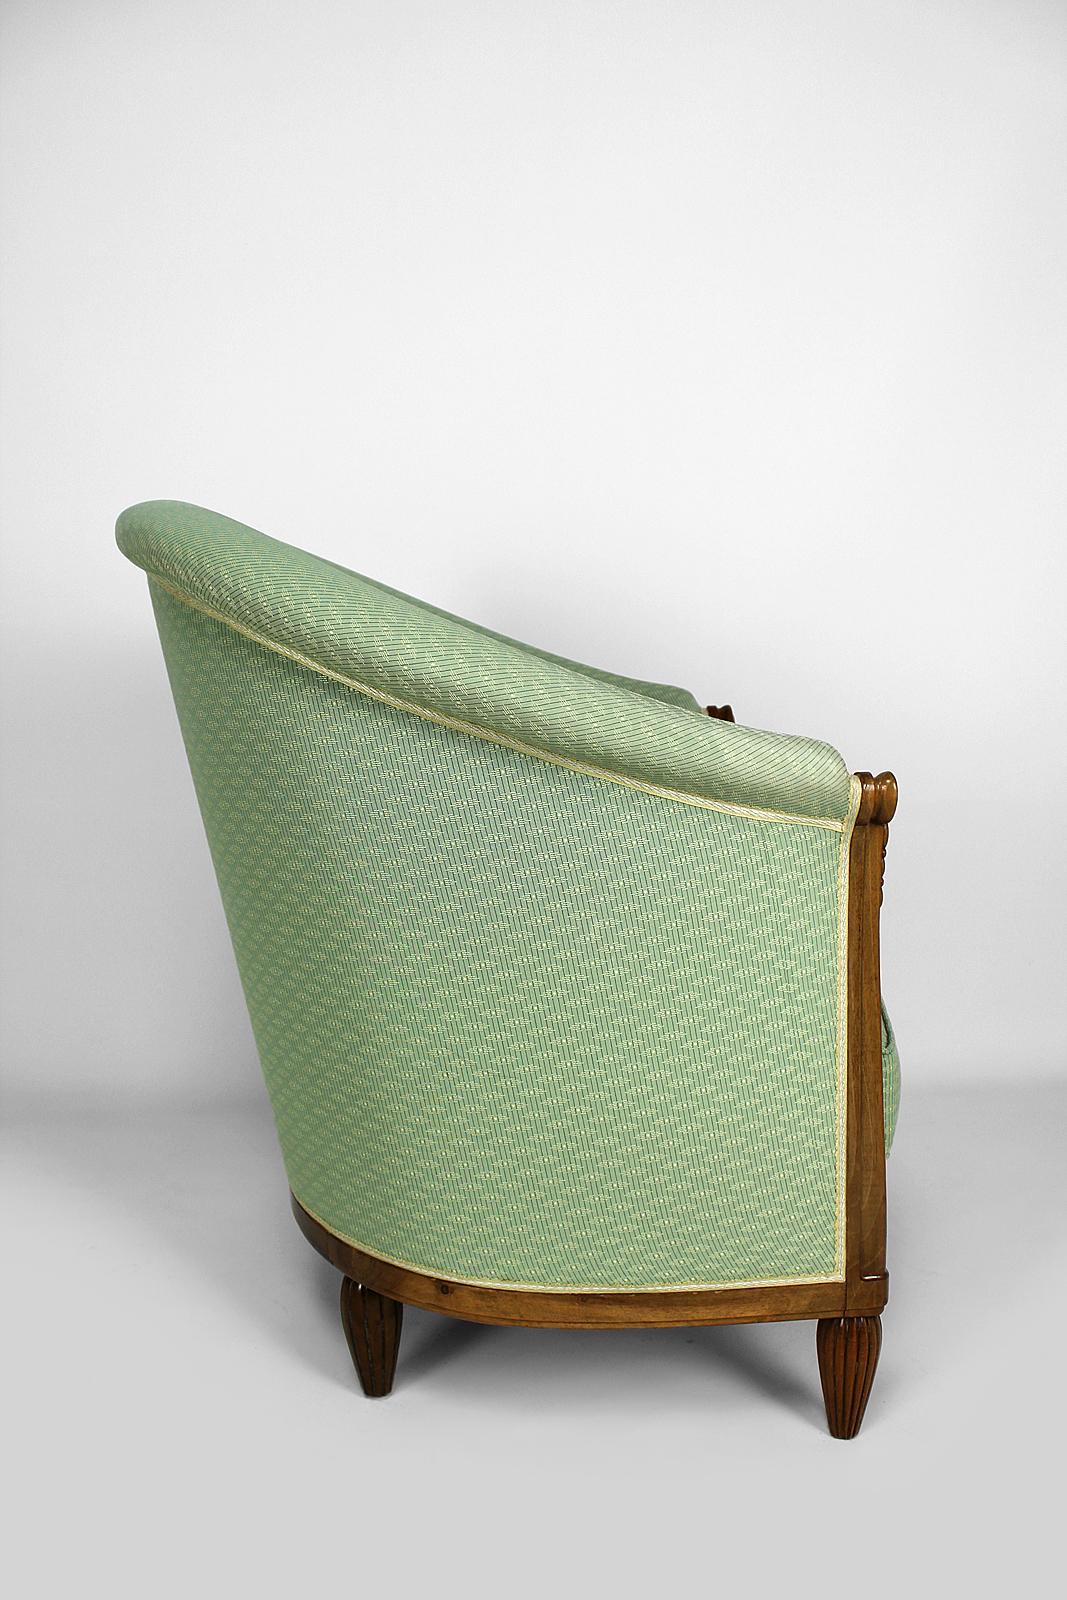 Early 20th Century Art Deco Armchair by Ateliers Gauthier-Poinsignon in walnut, circa 1920-1930 For Sale